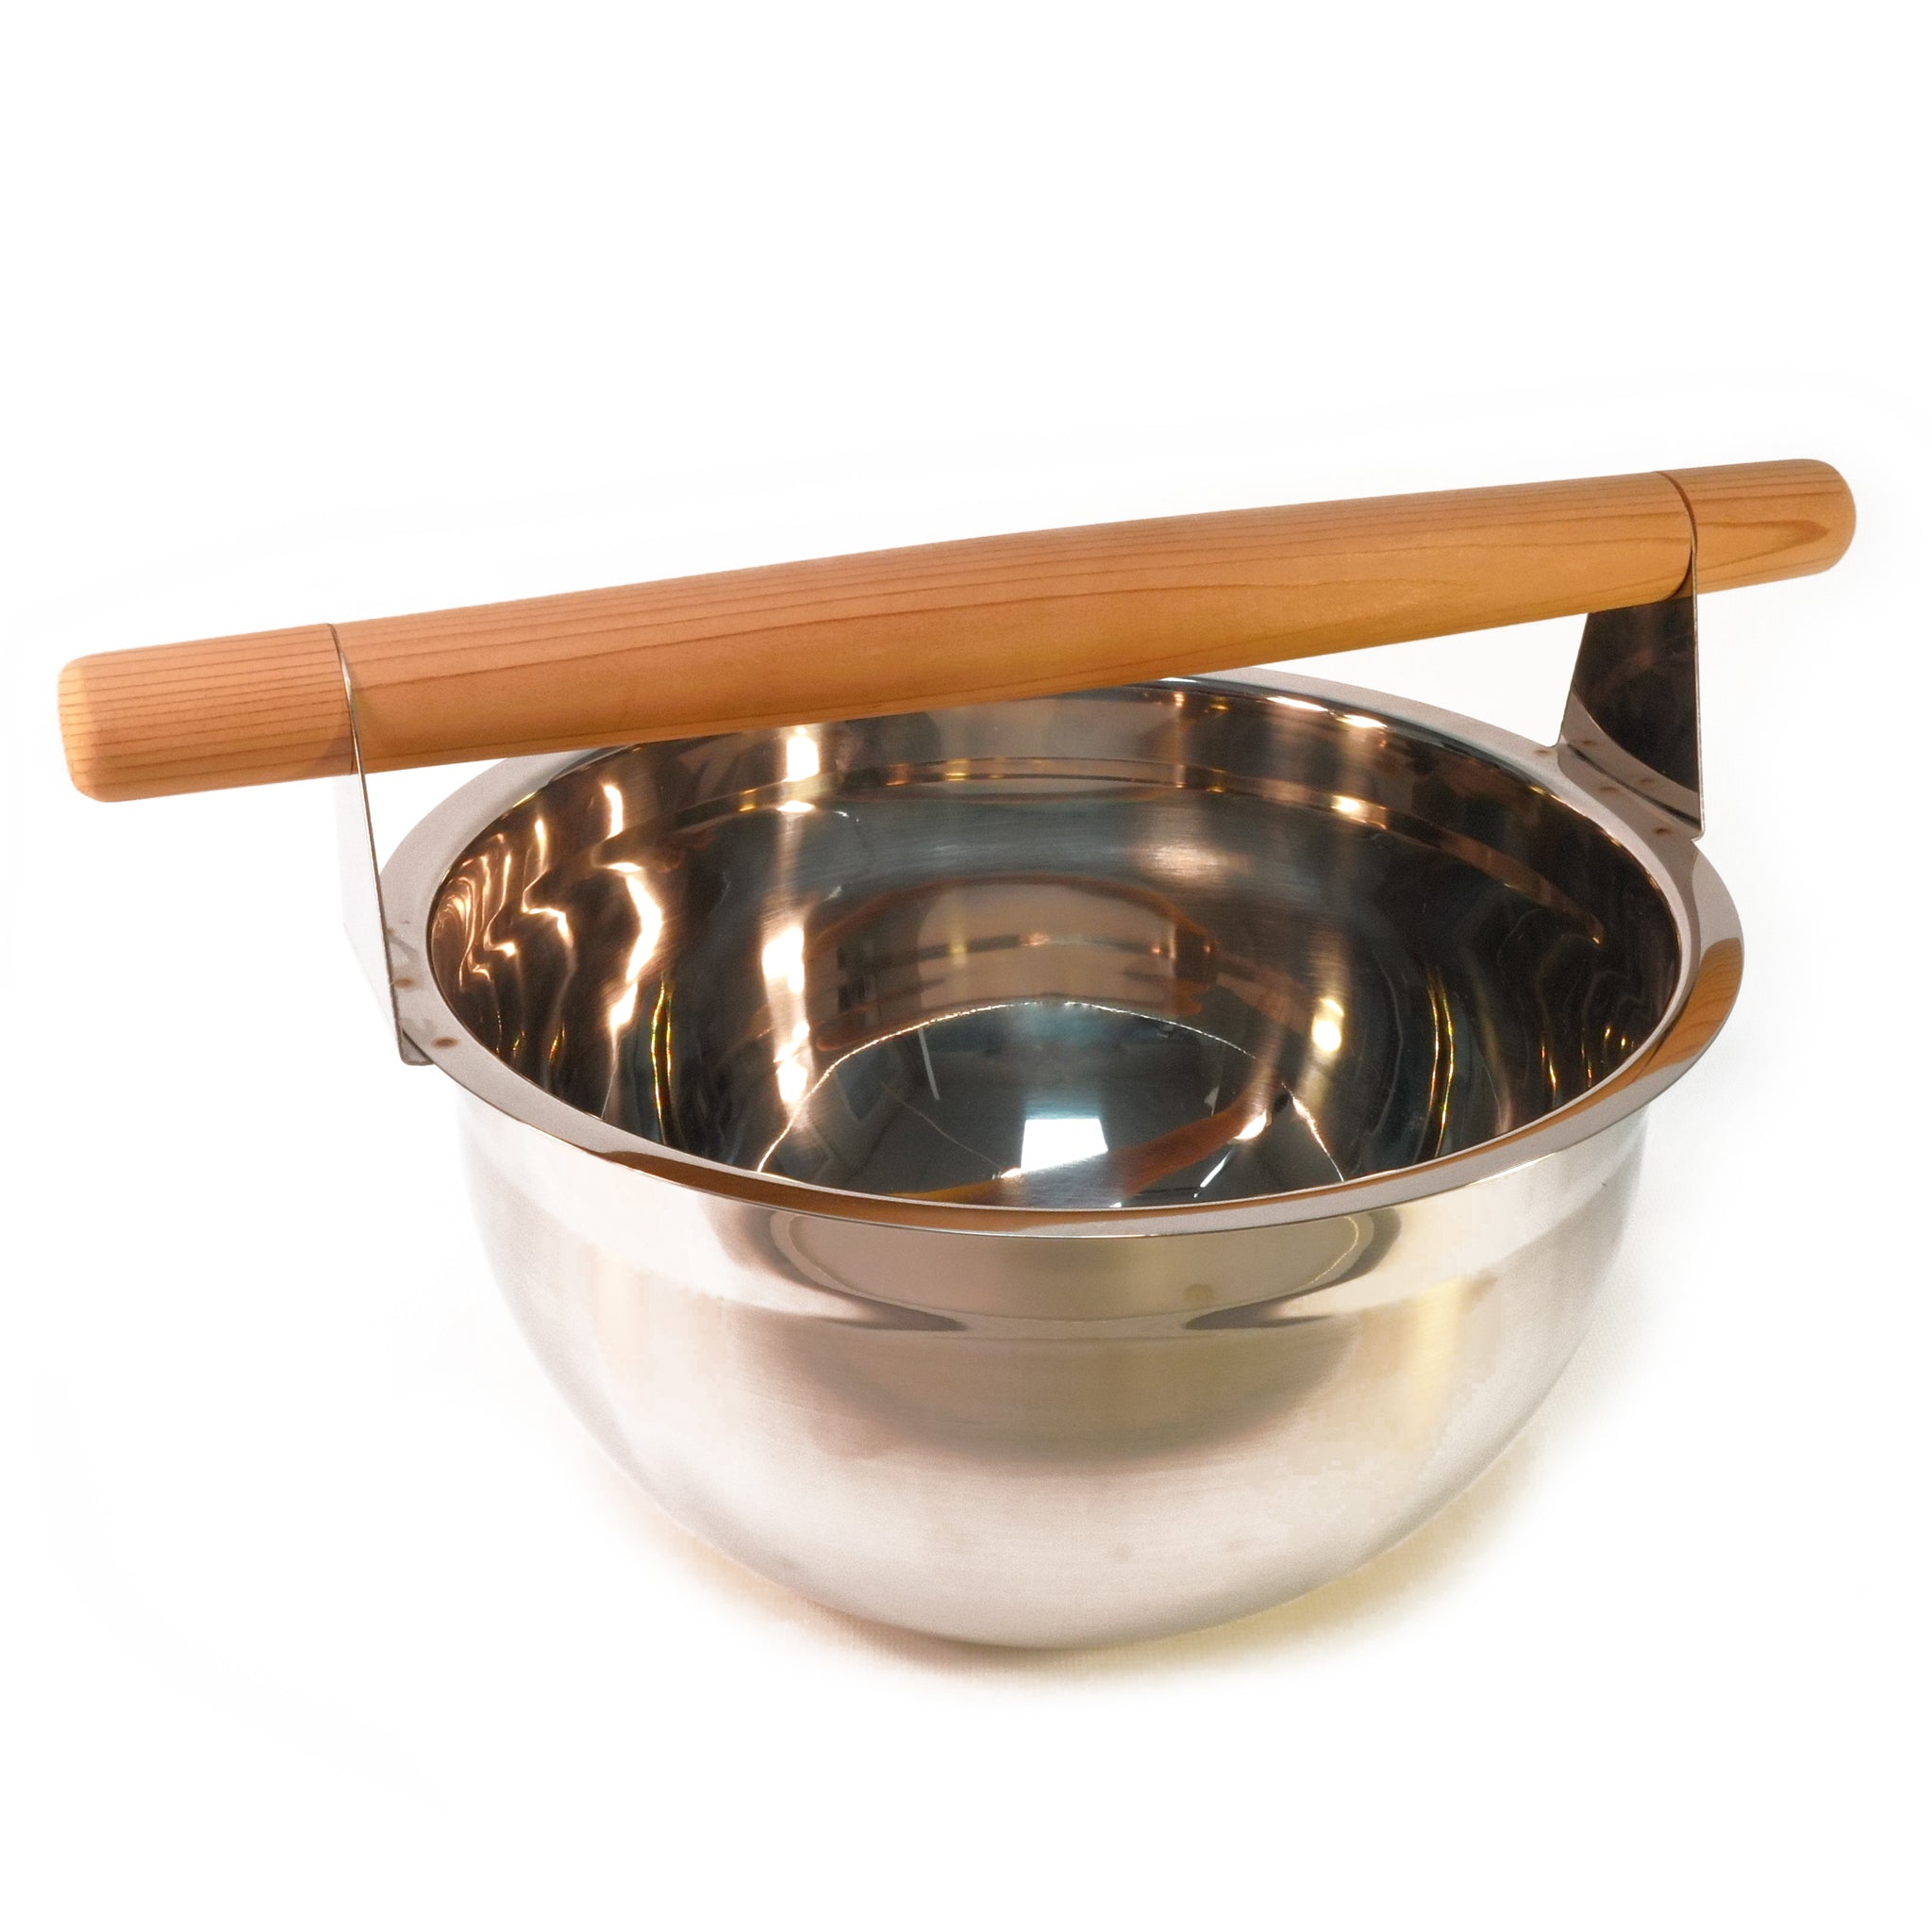 Stainless steel sauna bucket with wooden handle on white background